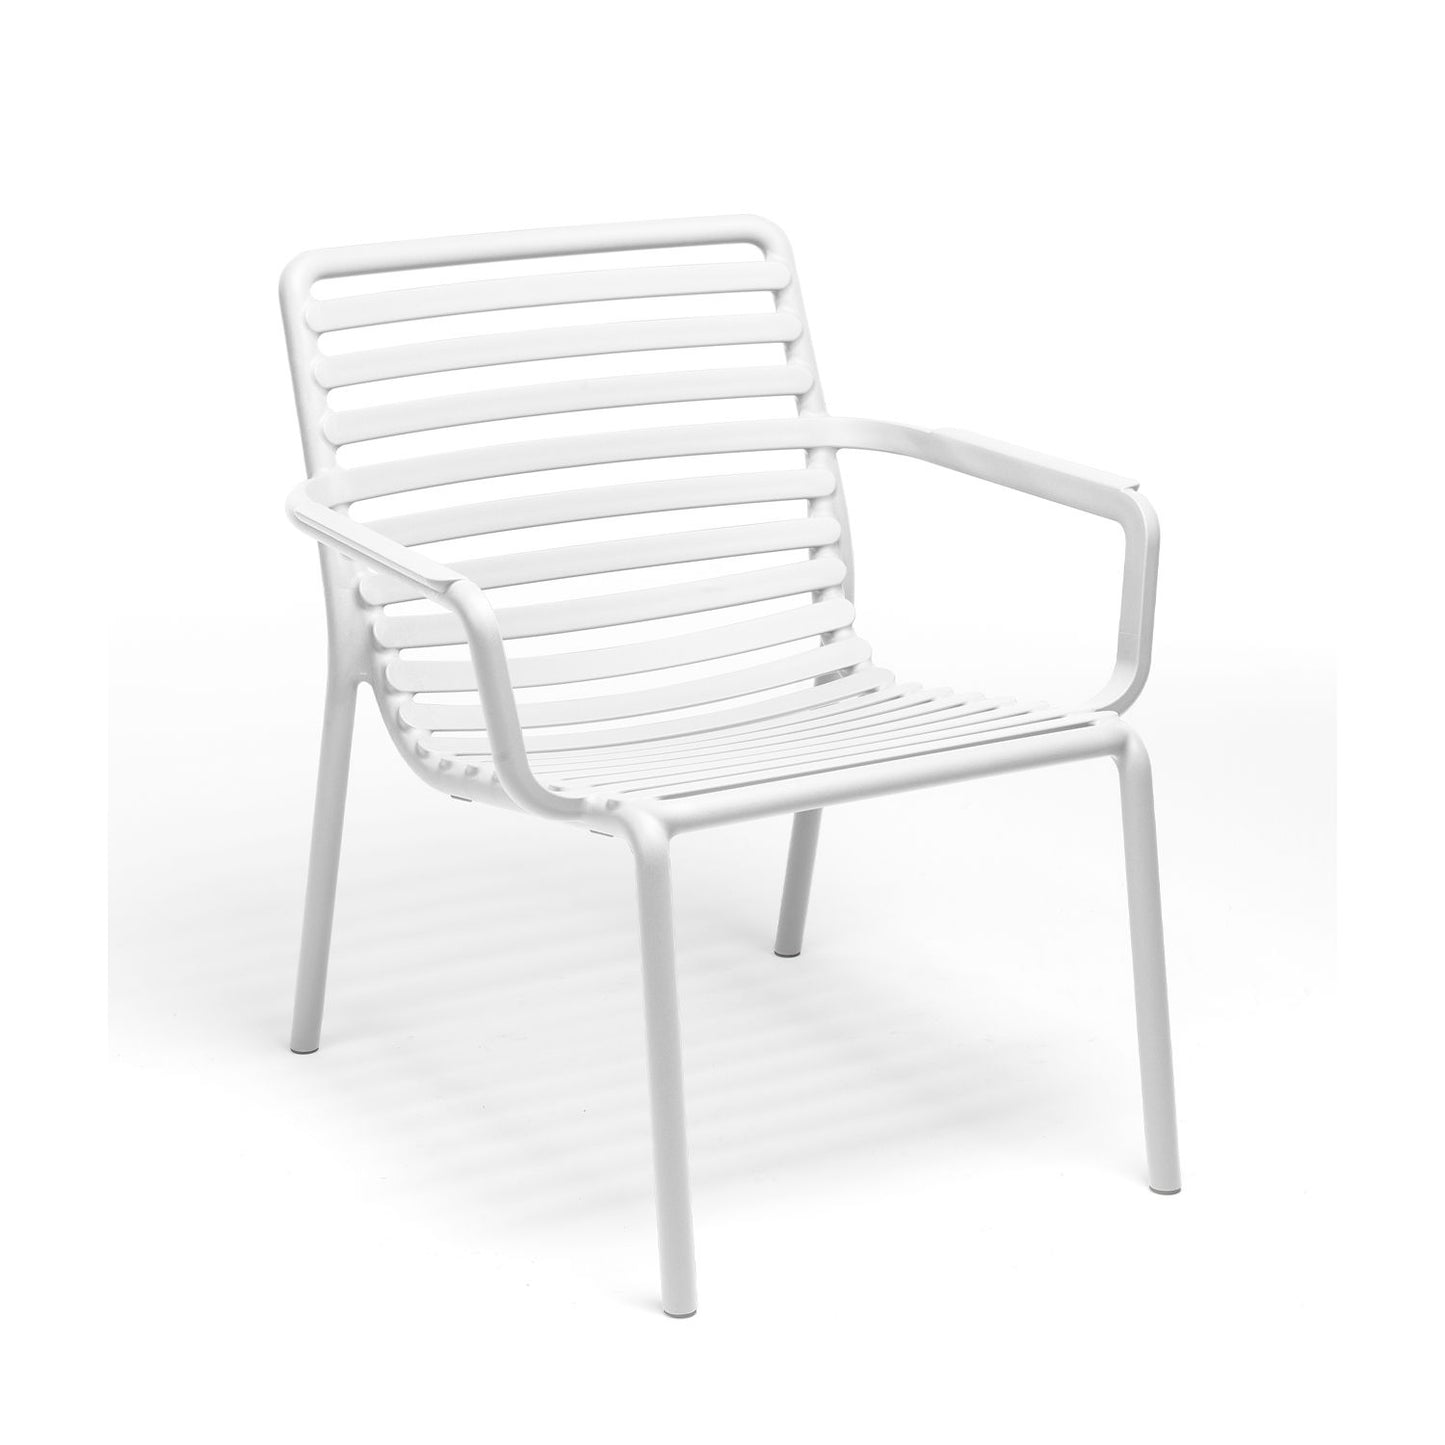 Doga Relax Garden Chair By Nardi - Set Of 4 - White